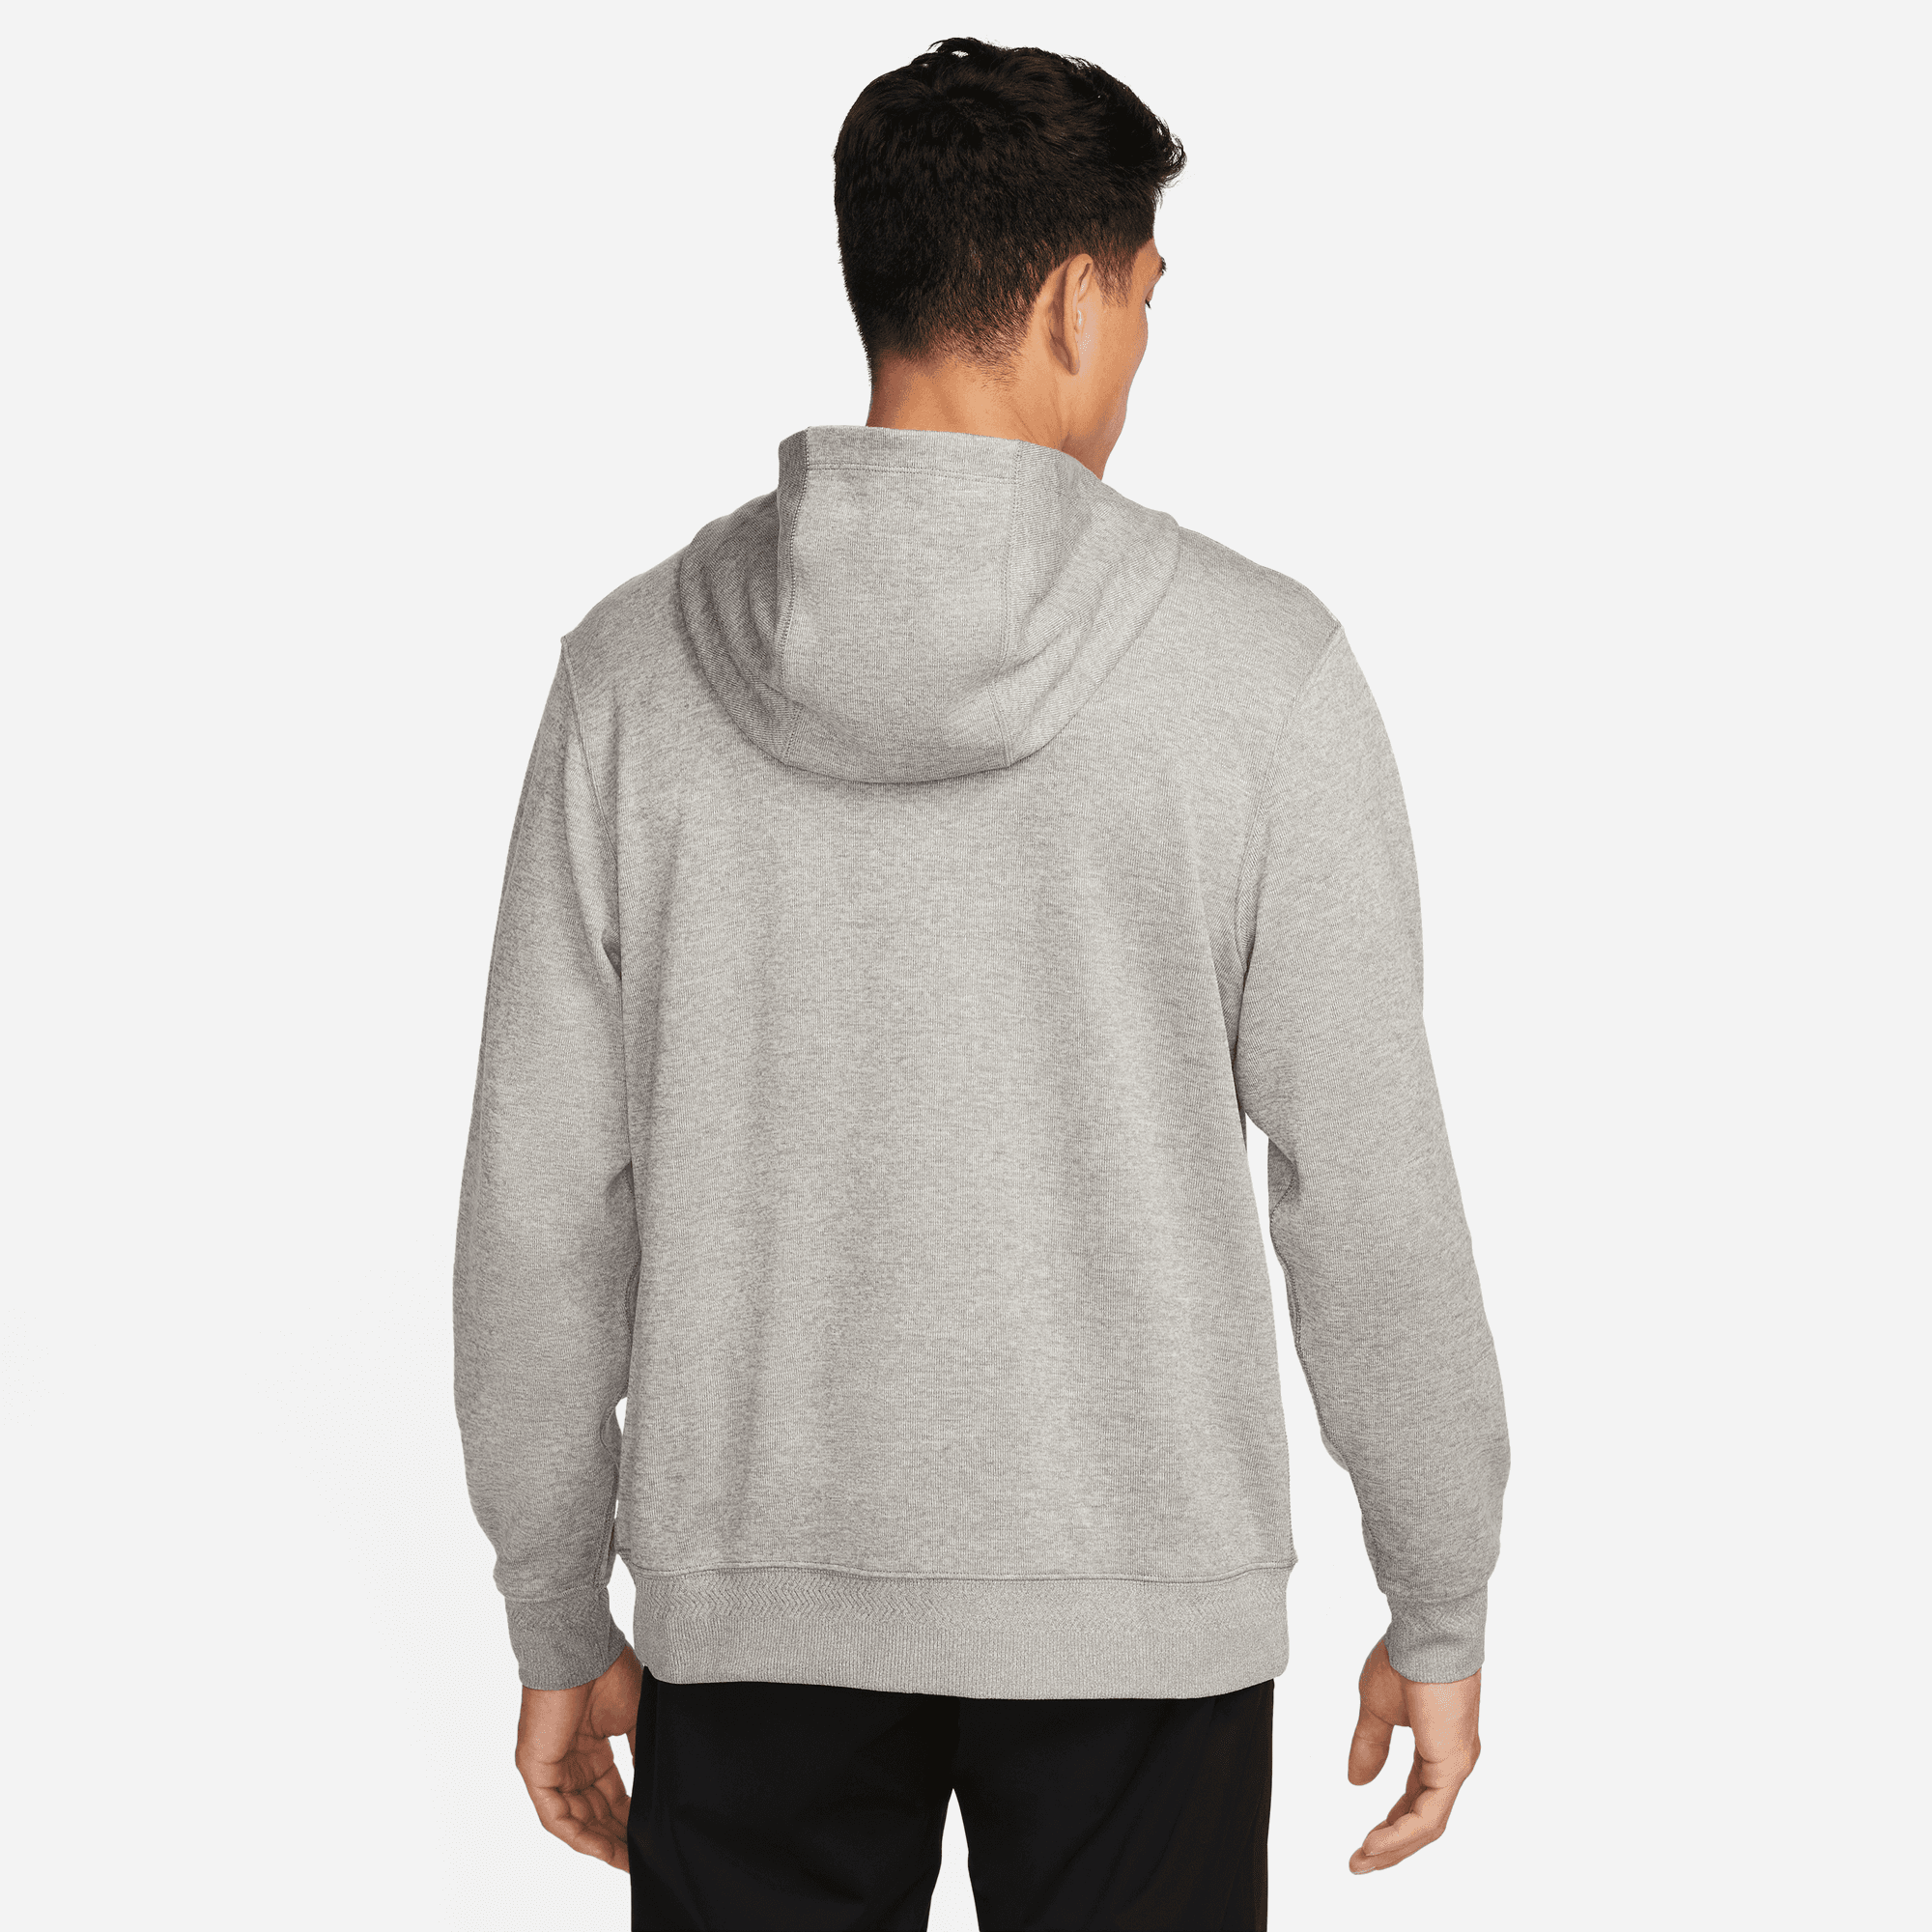 Nike Dri-FIT Zip Neck Golf Hoodie Dust/White/Brushed Silver ...